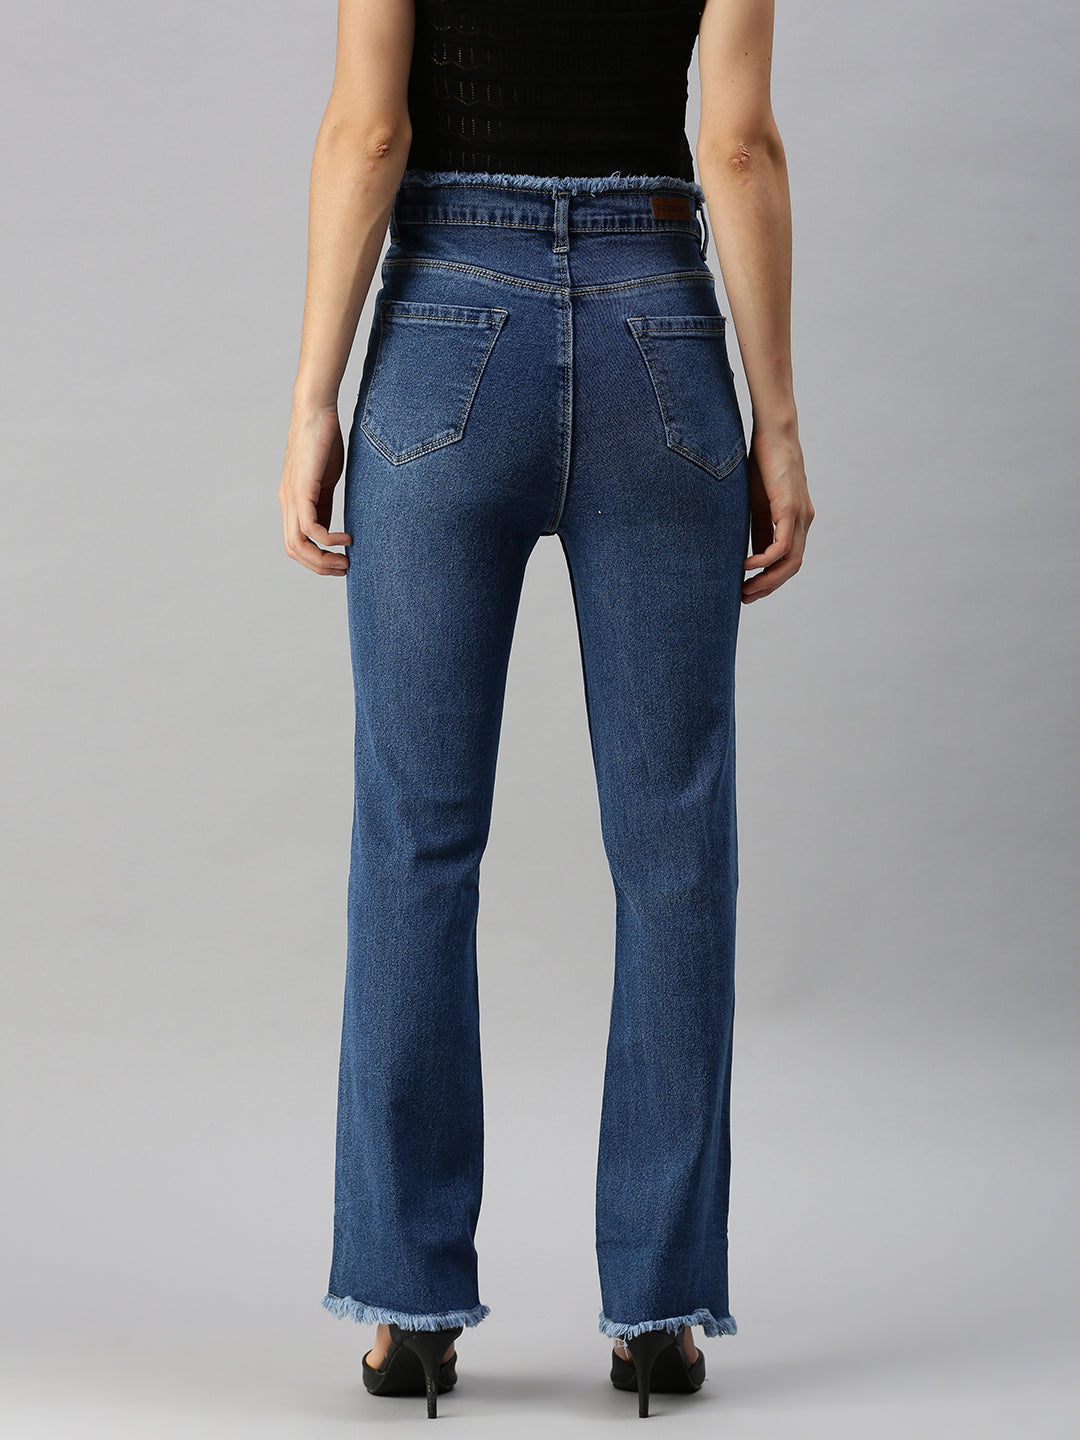 Women's Blue Solid Relaxed Fit Denim Jeans